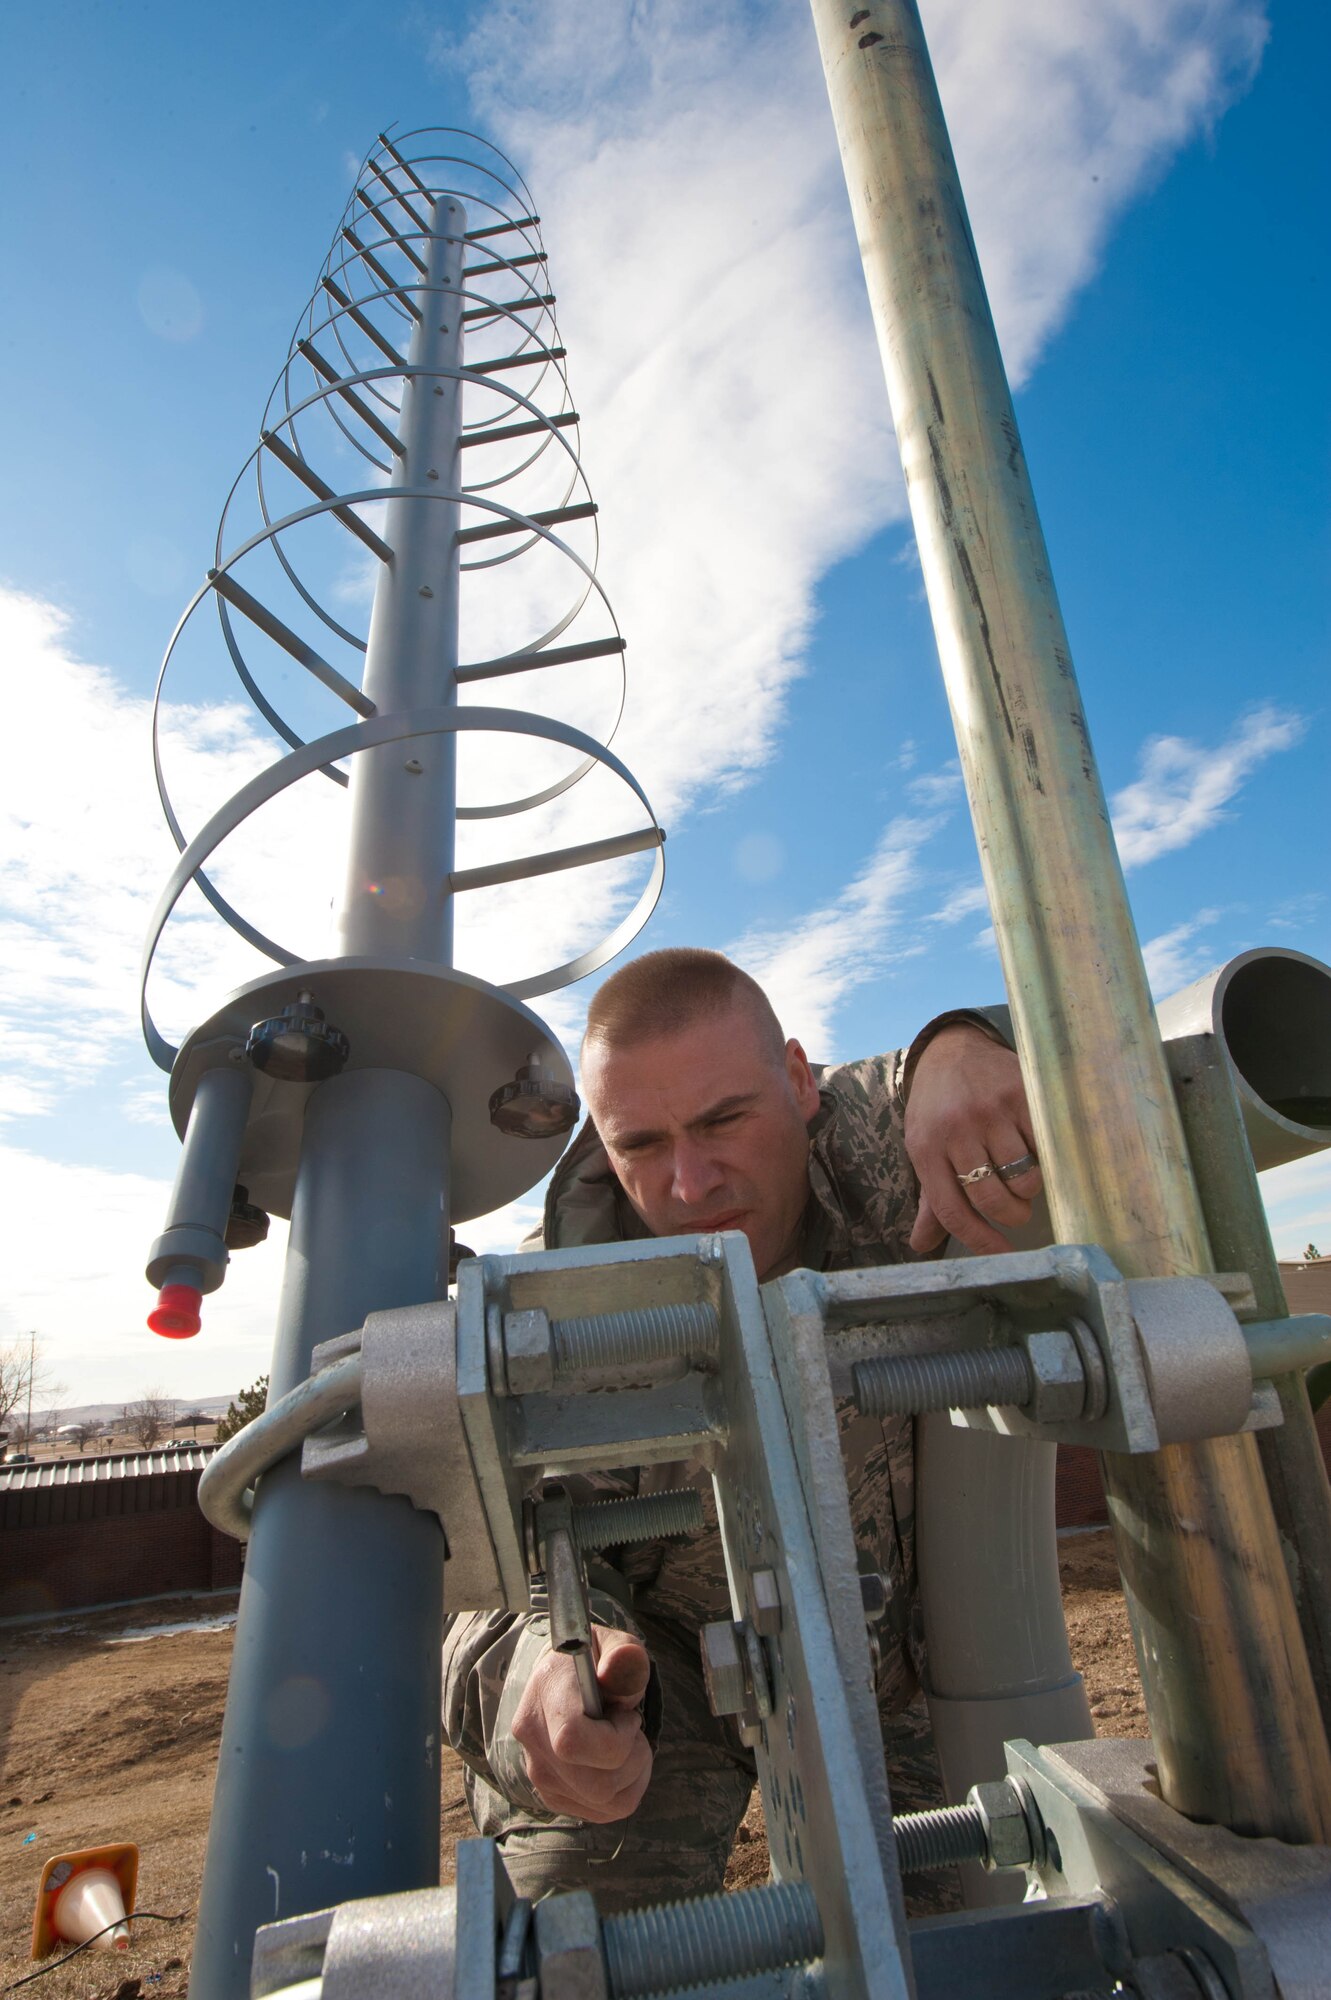 Master Sgt. James Shearer, 28th Communications Squadron transmission system radio maintainer, mounts and fastens a new helical antenna to a AM-1 mount used by the 28th Operations Support Squadron at Ellsworth Air Force Base, S.D., Feb. 13, 2012. The 28th OSS uses the antenna for joint range extension capabilities, to send and retrieve information via satellite. (U.S. Air Force photo by Airman 1st Class Zachary Hada/Released)